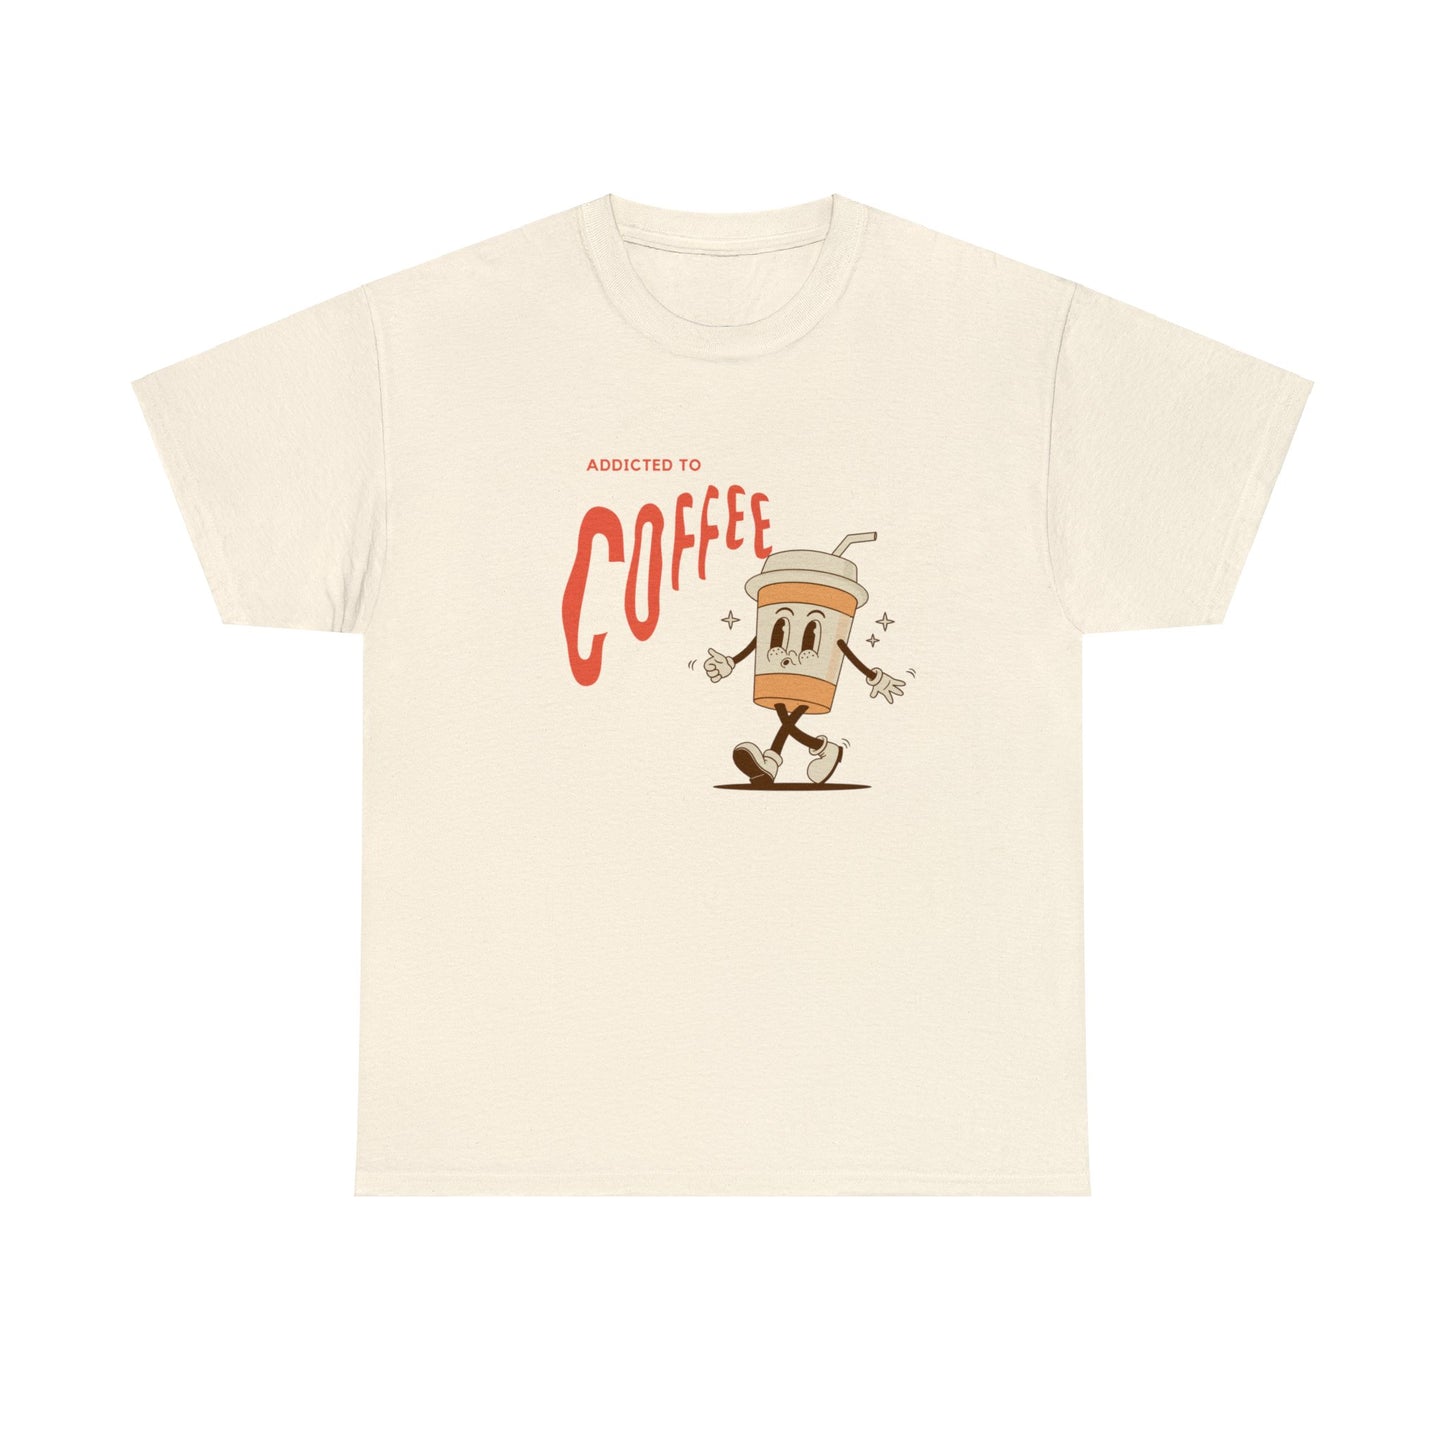 ADDICTED TO COFFEE t-shirt in English - adult